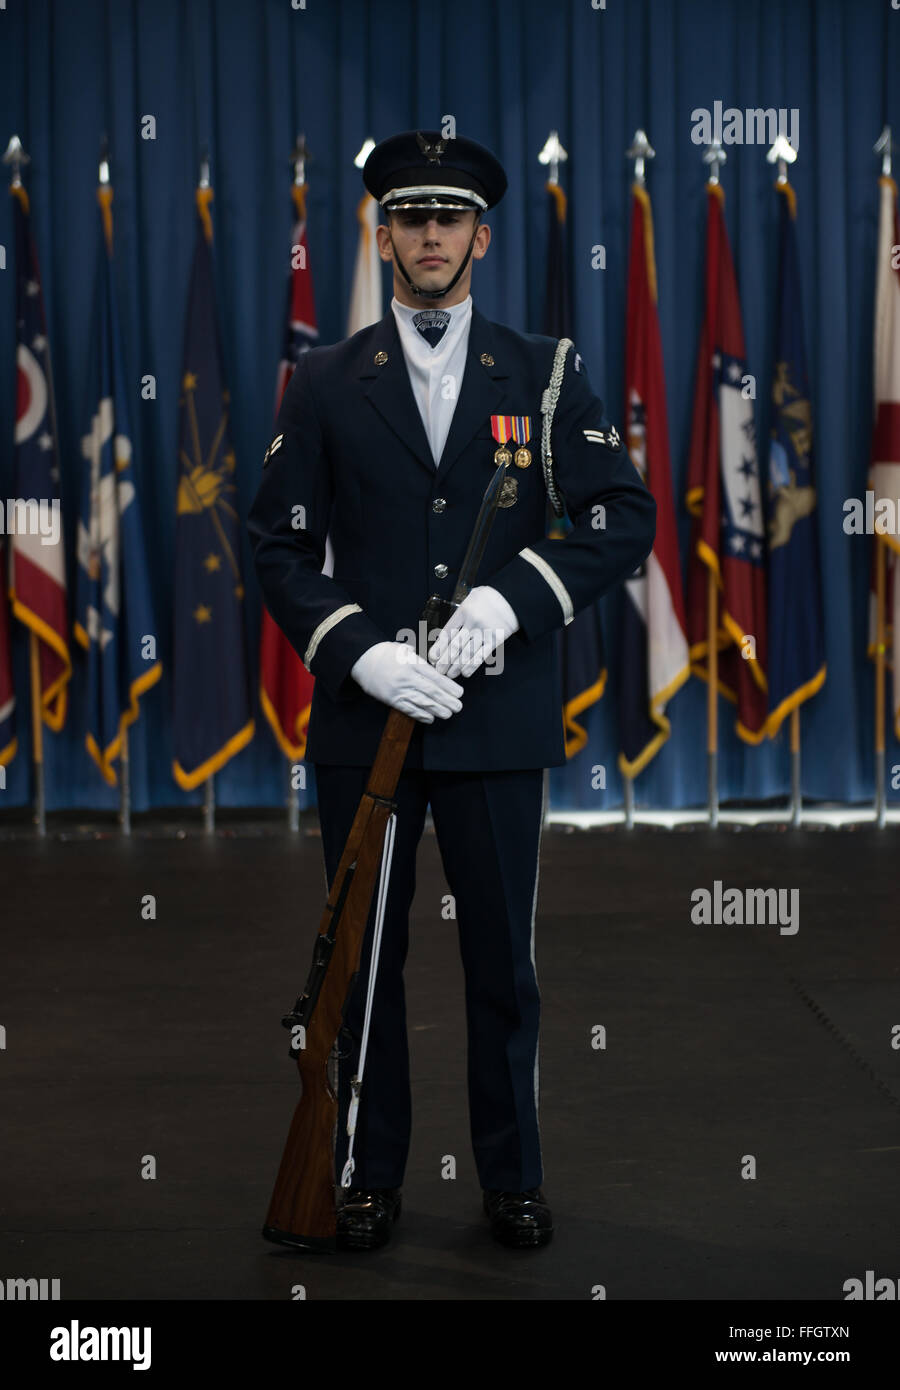 Airman 1st Class Larry Brown stands at attention at Joint Base Anacostia-Bolling. Stock Photo